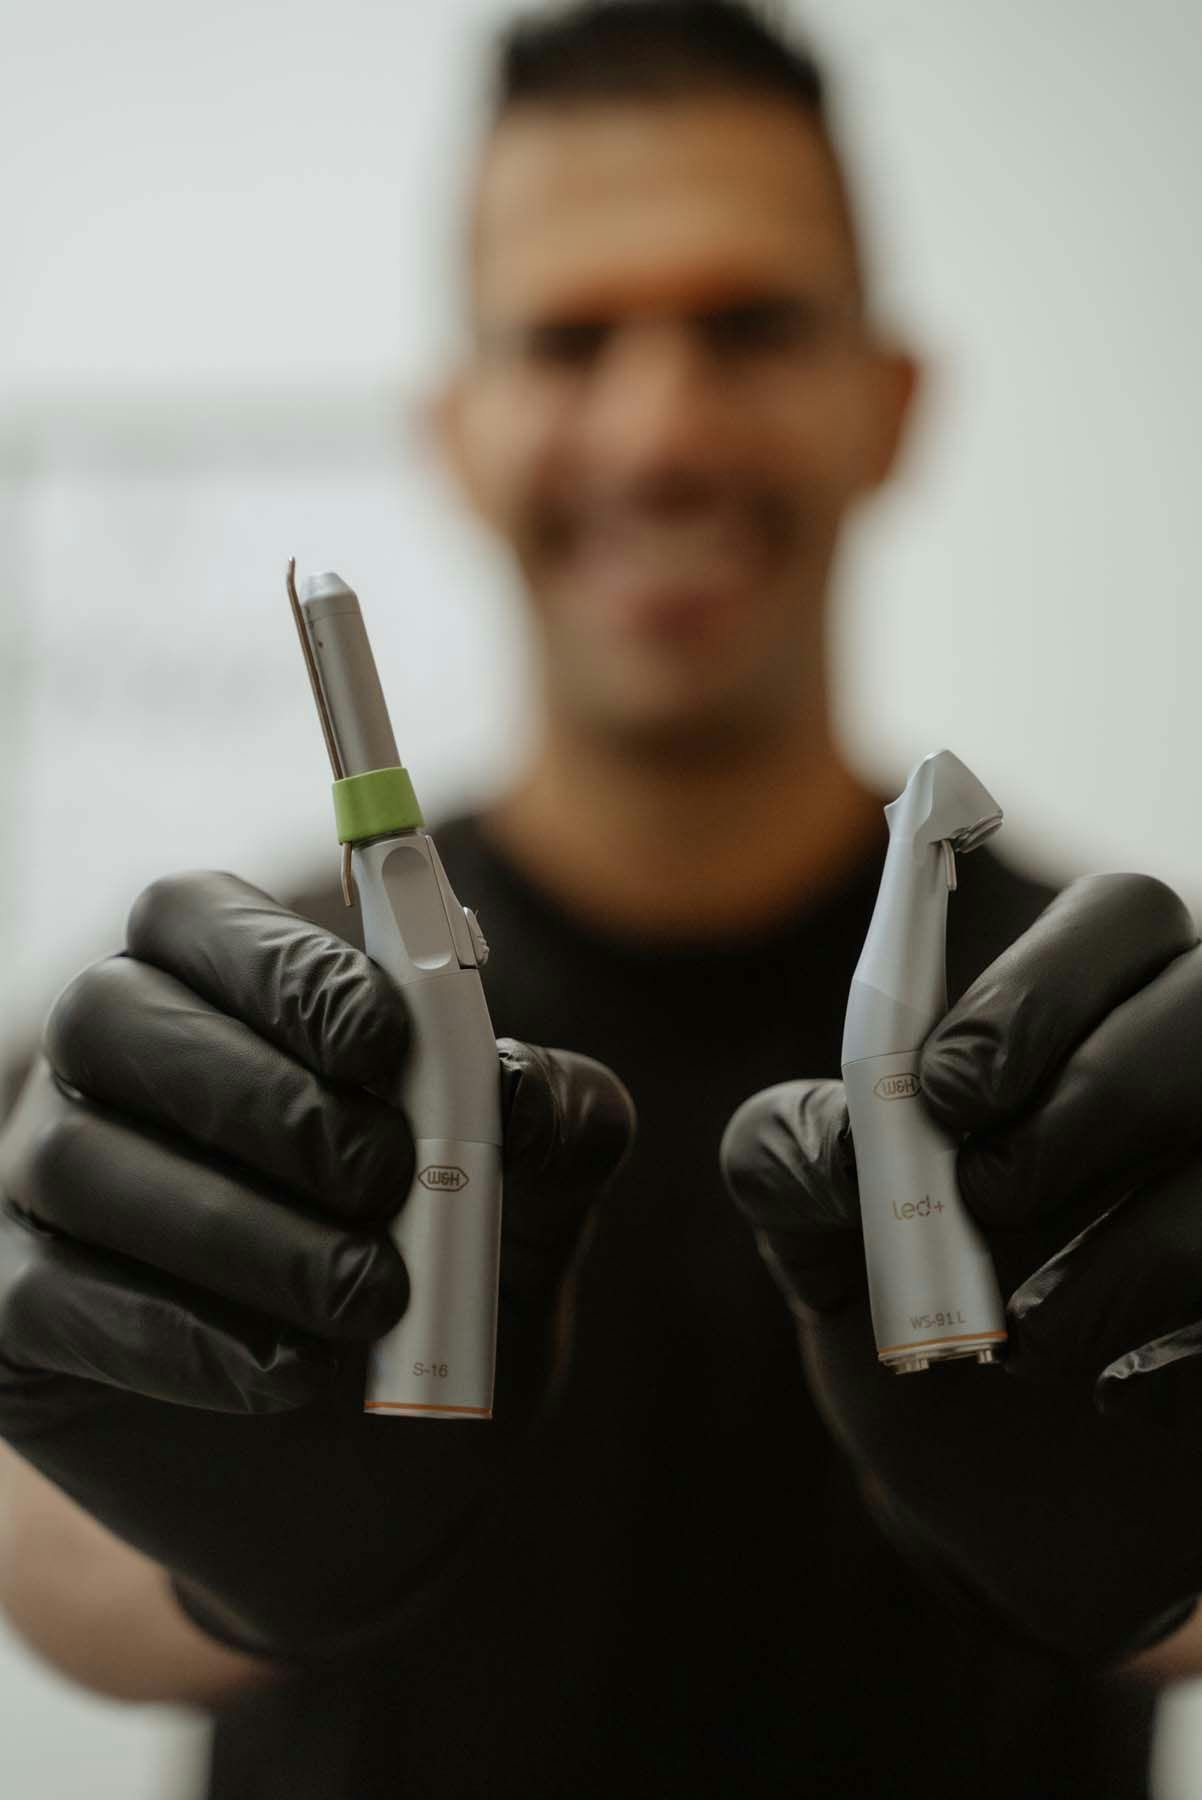 Figures 2 and 3. The W&H WS-91 surgical handpiece and the W&H S-16 (Figure 3) are key tools in this author’s armamentarium and provide confidence in his everyday surgical dentistry. | Image Credit: © W&H